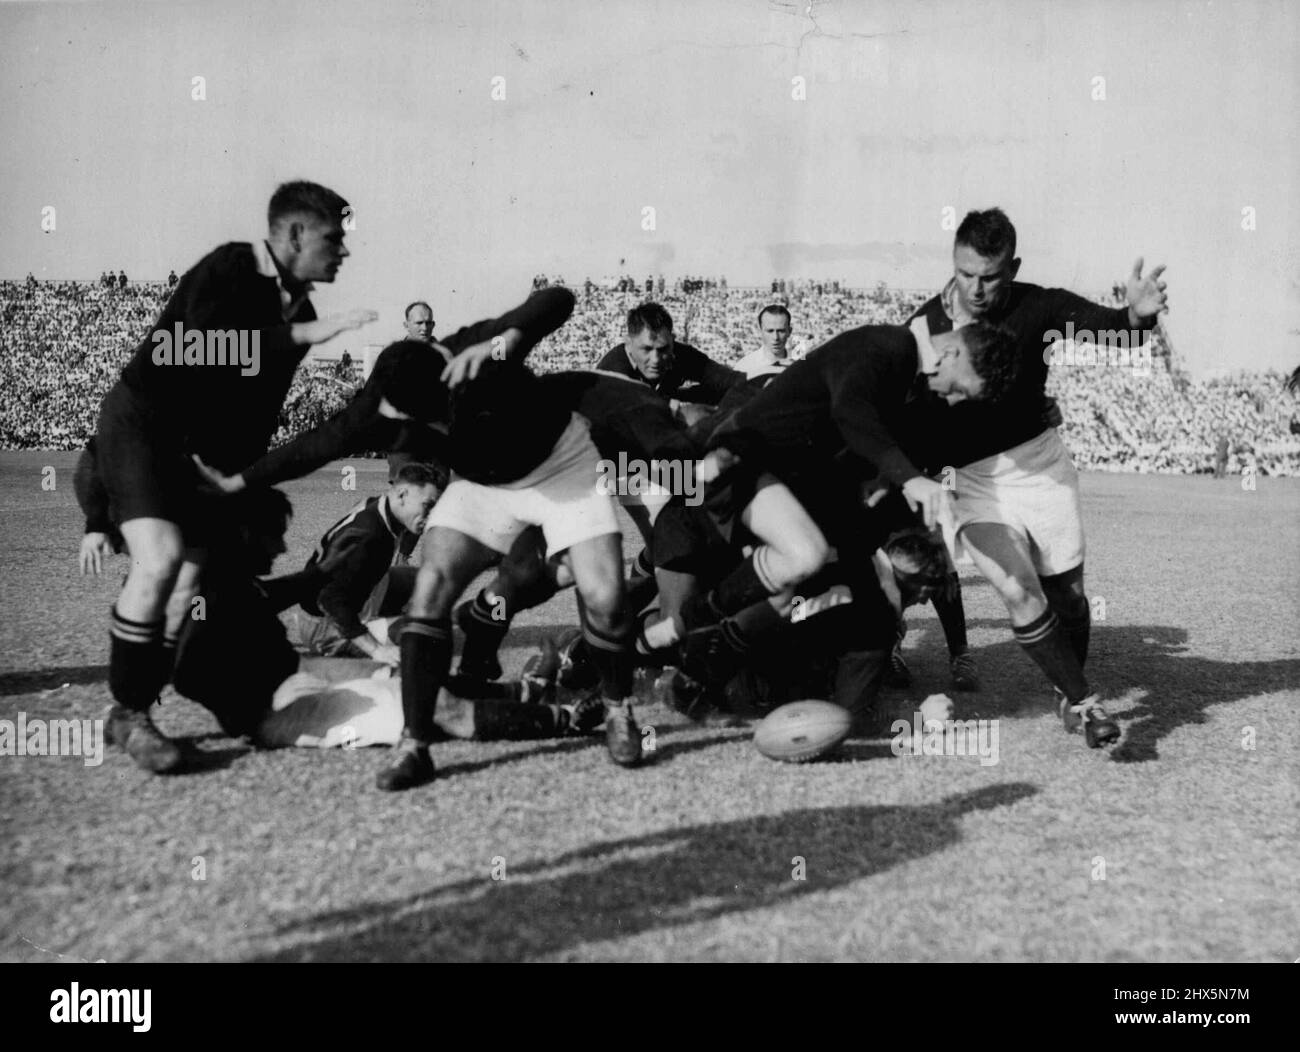 All Blacks in Durban - Wilcox, New Zealand forward, barges his way through a loose scrum during the Match between the all Blacks and the South African Springboks in Durban September 3. Springboks won by 9 points to 3. September 20, 1949. (Photo by Associated Press Photo). Stock Photo